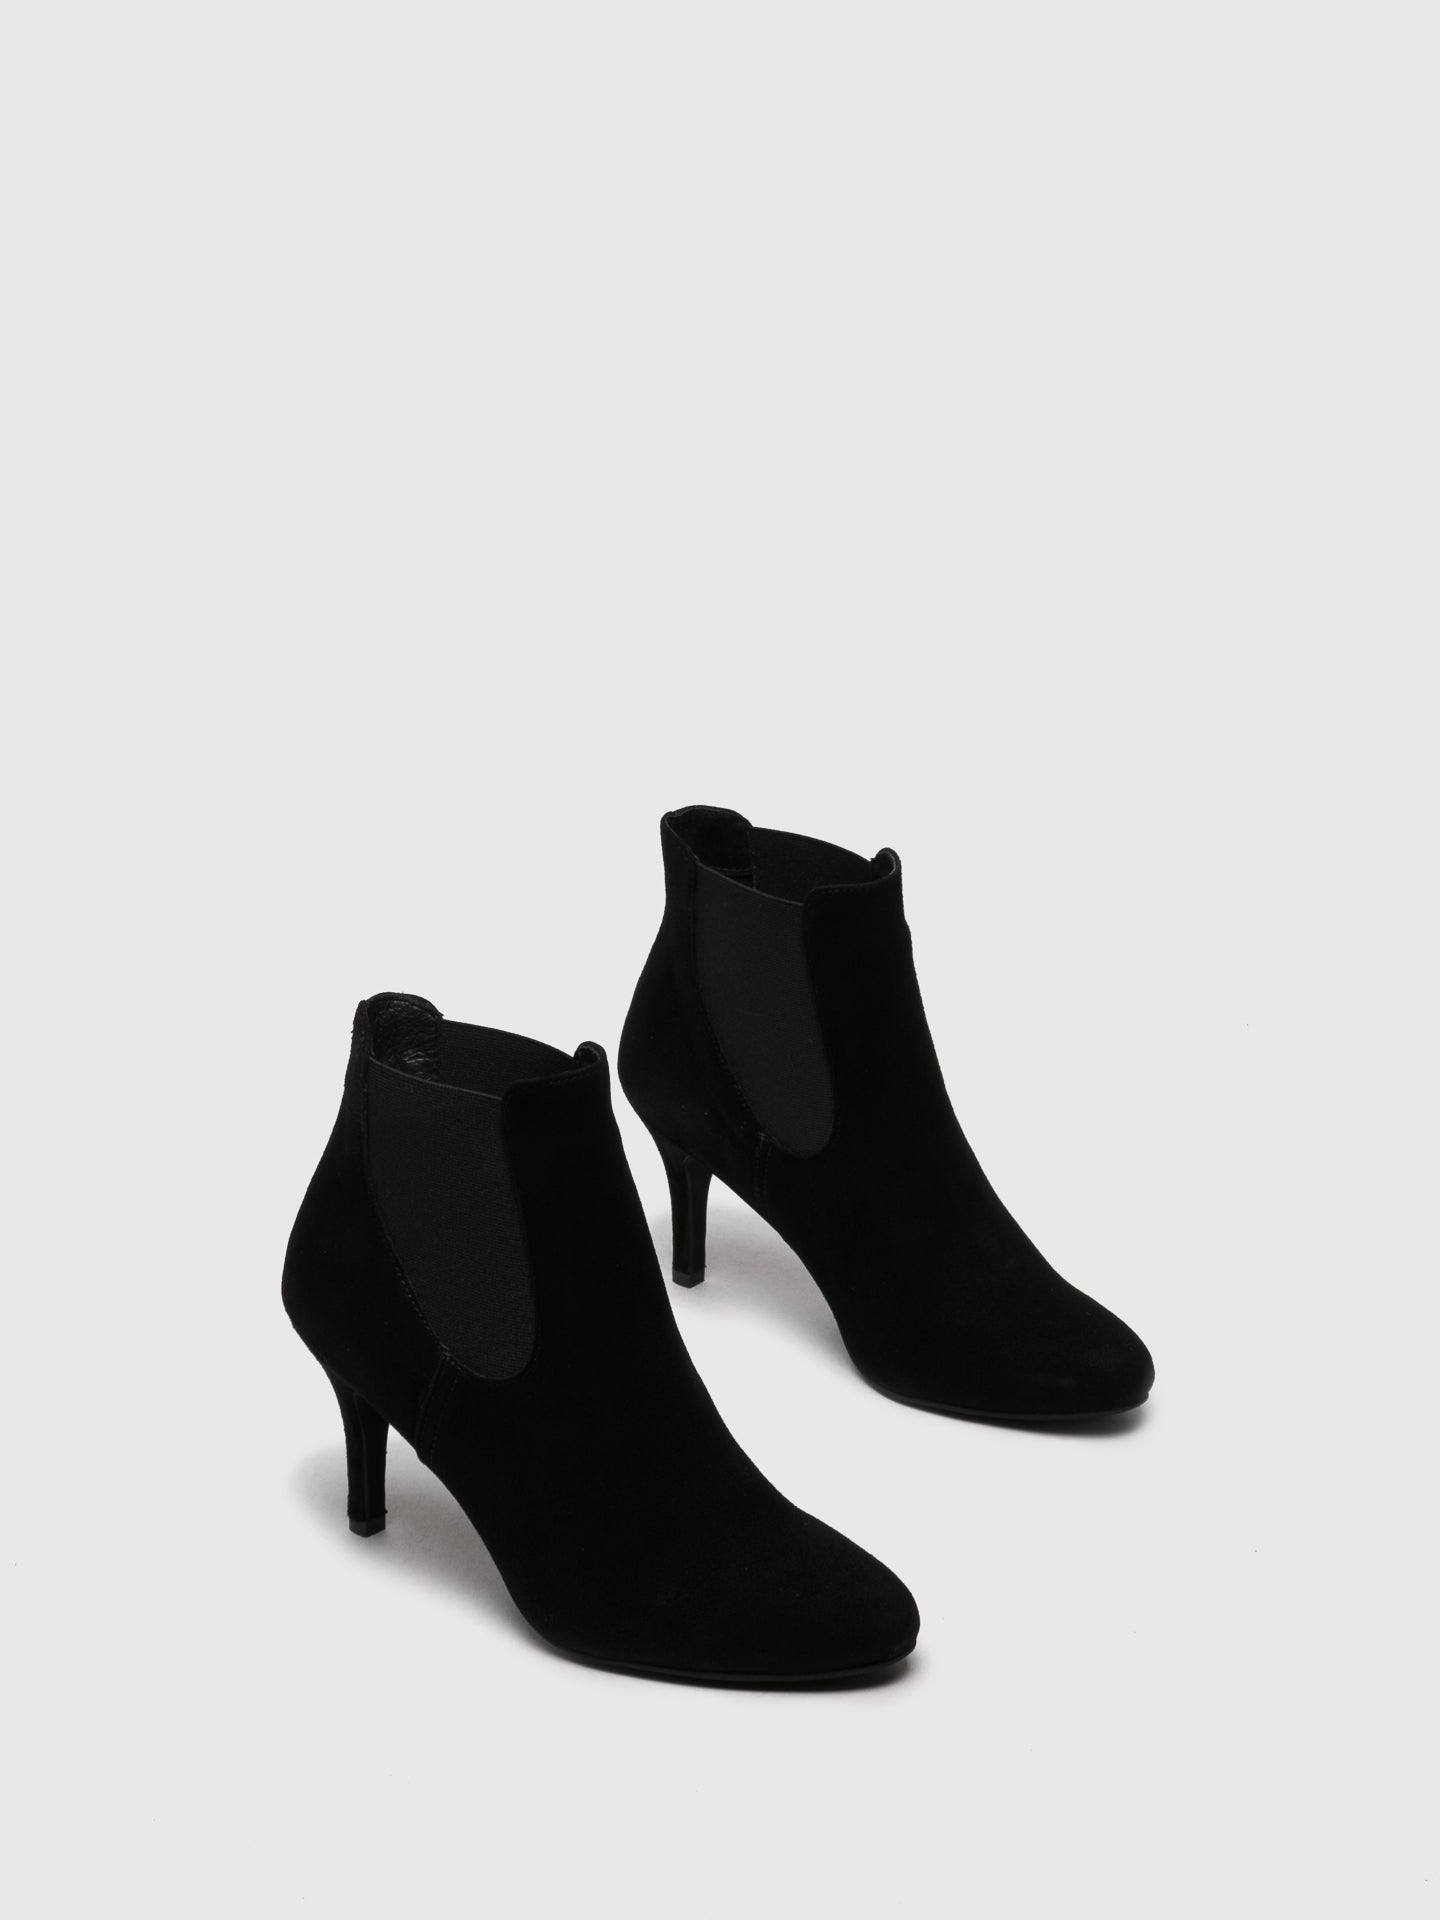 Foreva Black Elasticated Ankle Boots